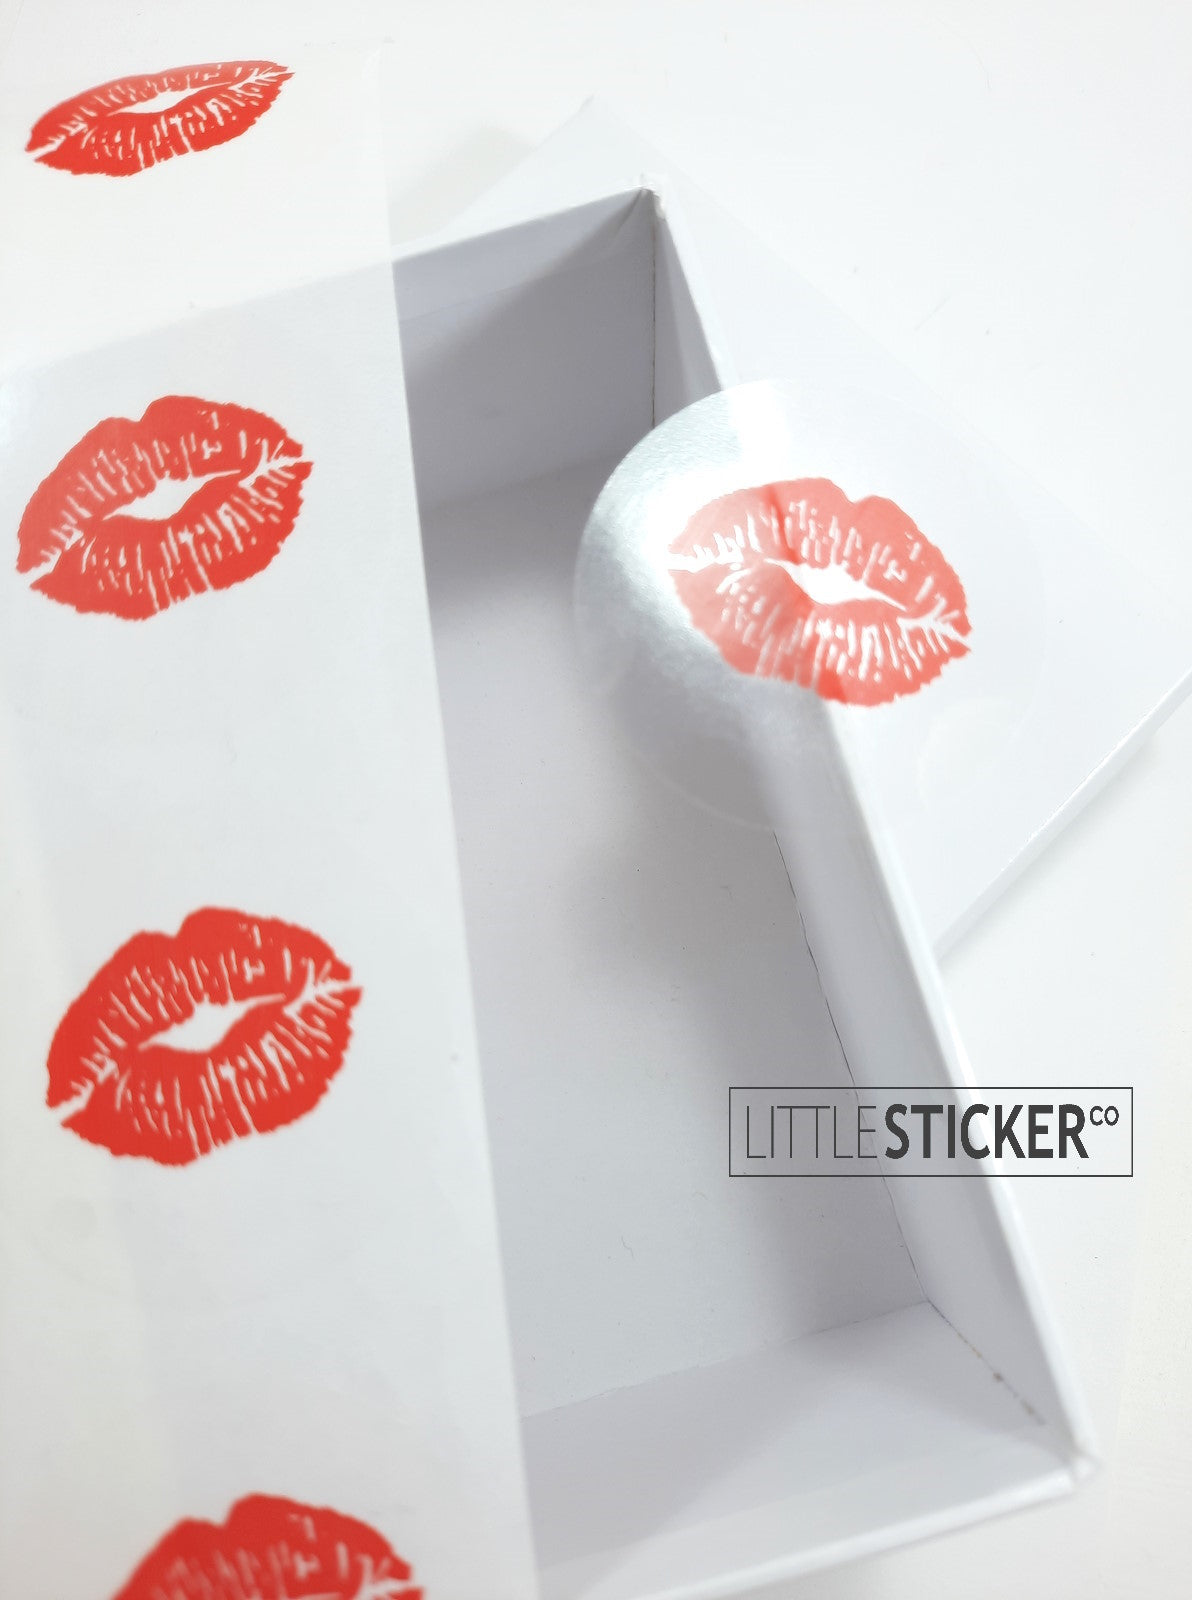 Kiss Lips stickers. 40mm round clear stickers with red lips